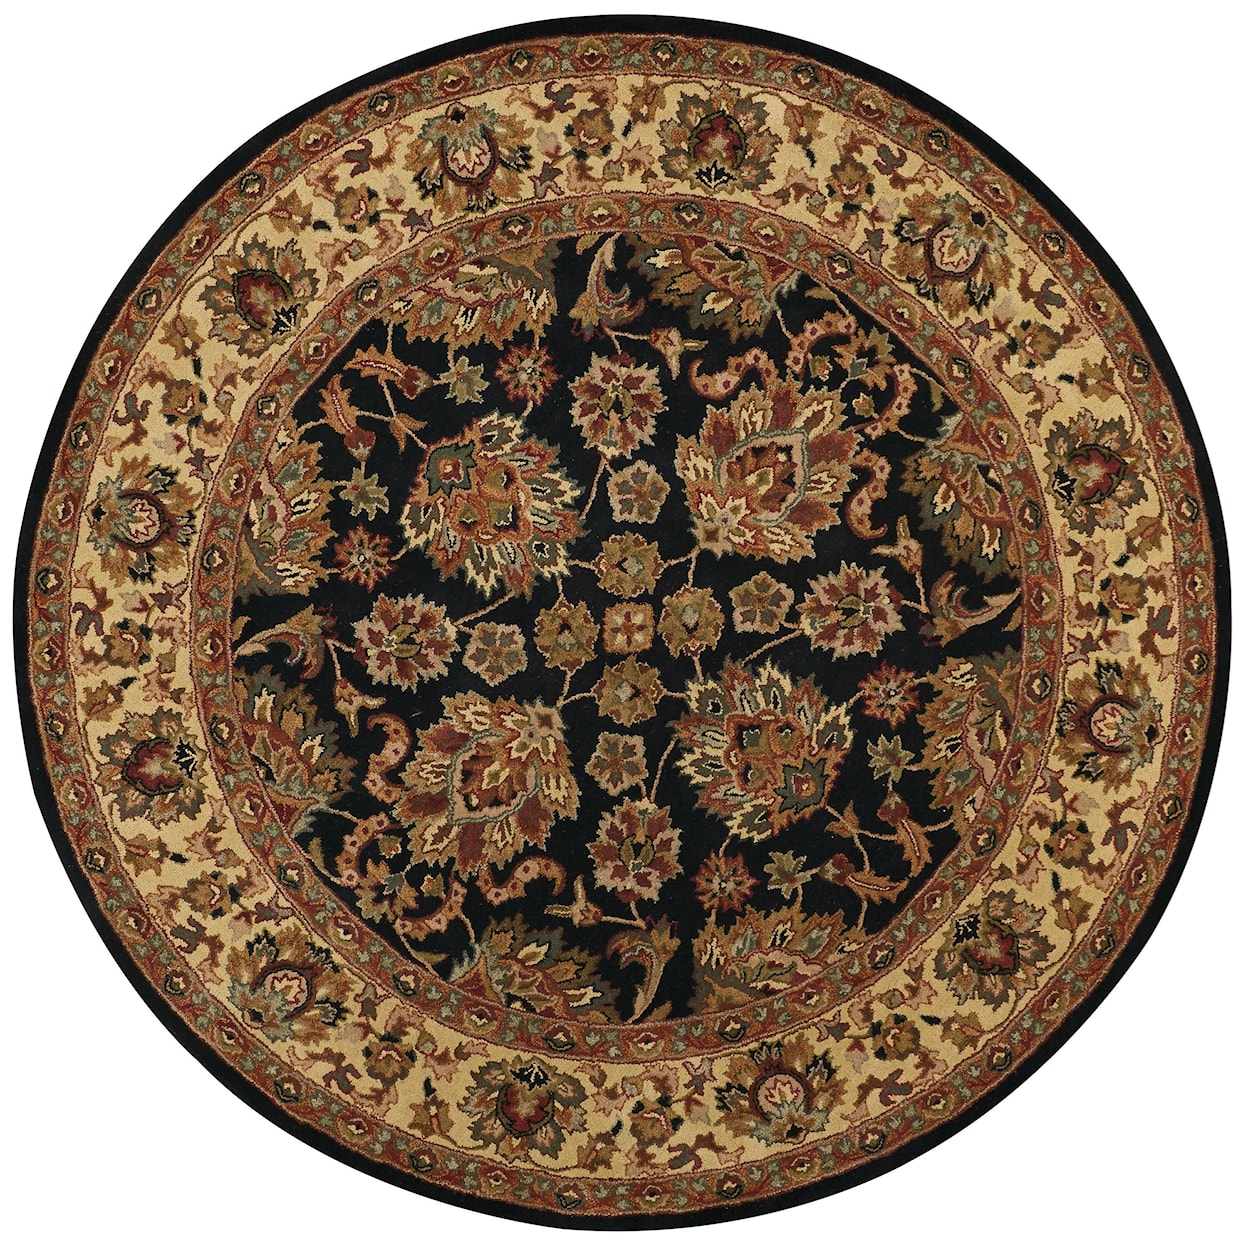 Feizy Rugs Yale Black/Gold 8' x 8' Round Area Rug